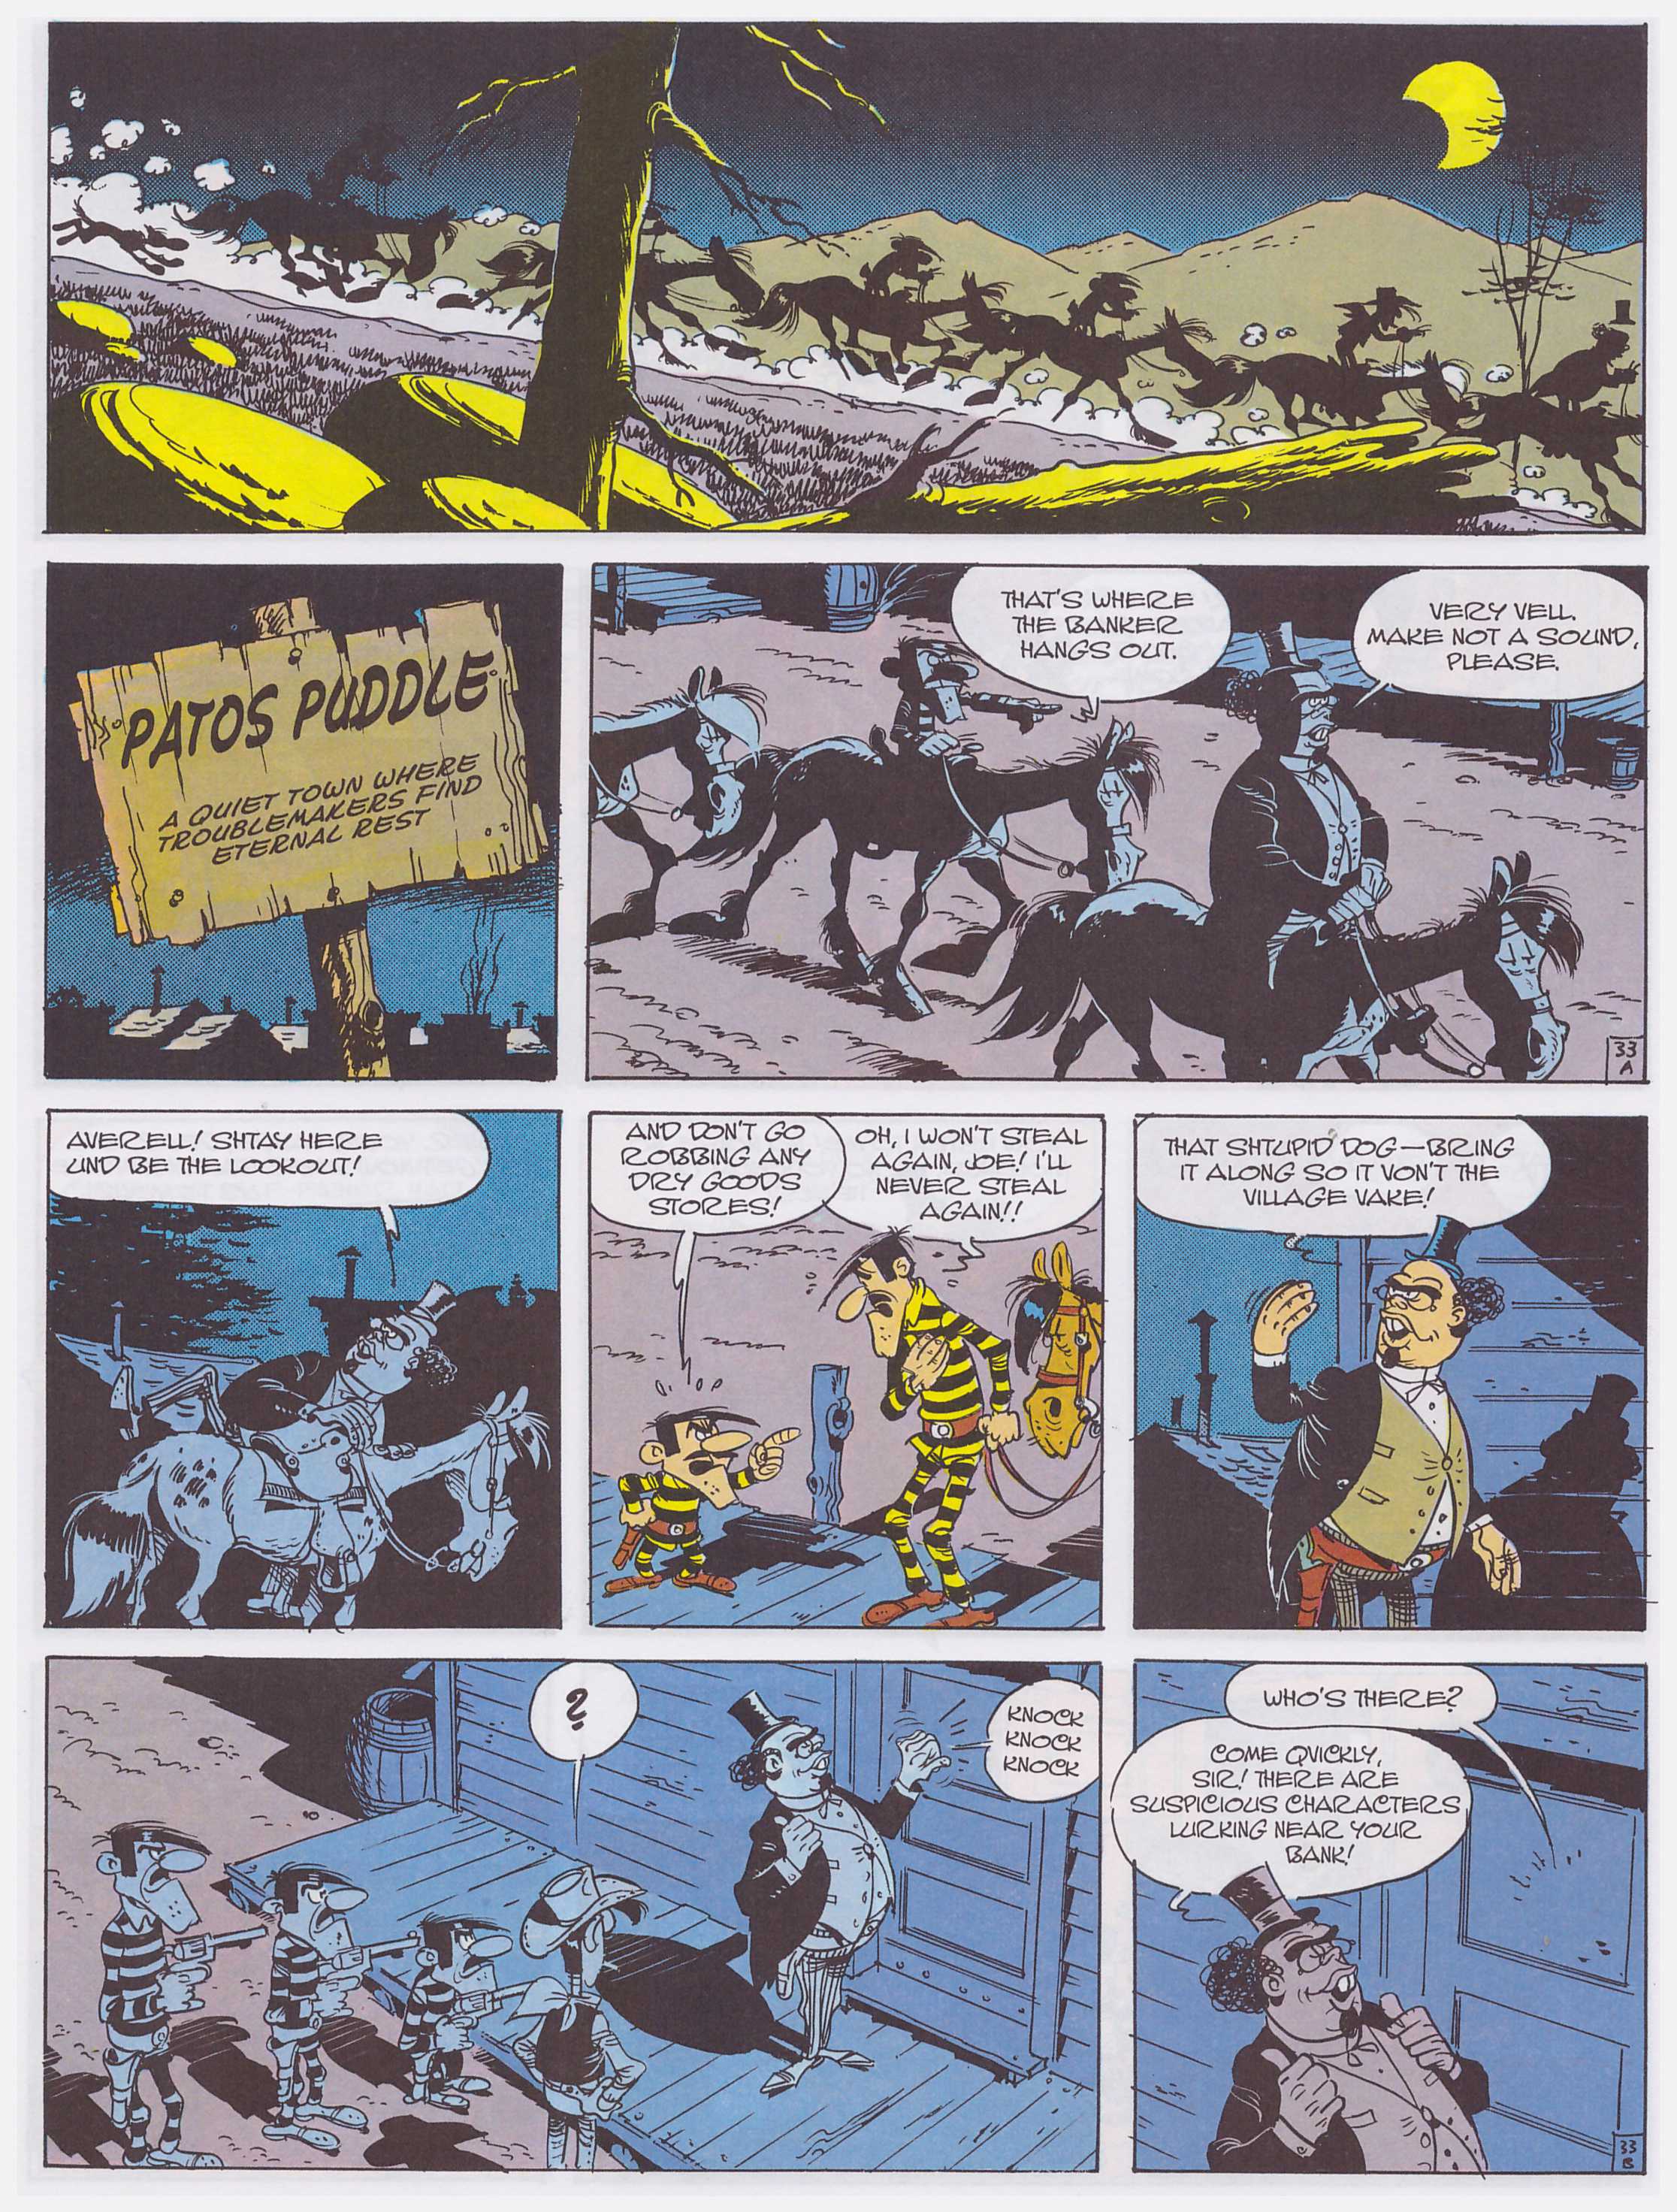 Lucky Luke Cure For The Daltons review